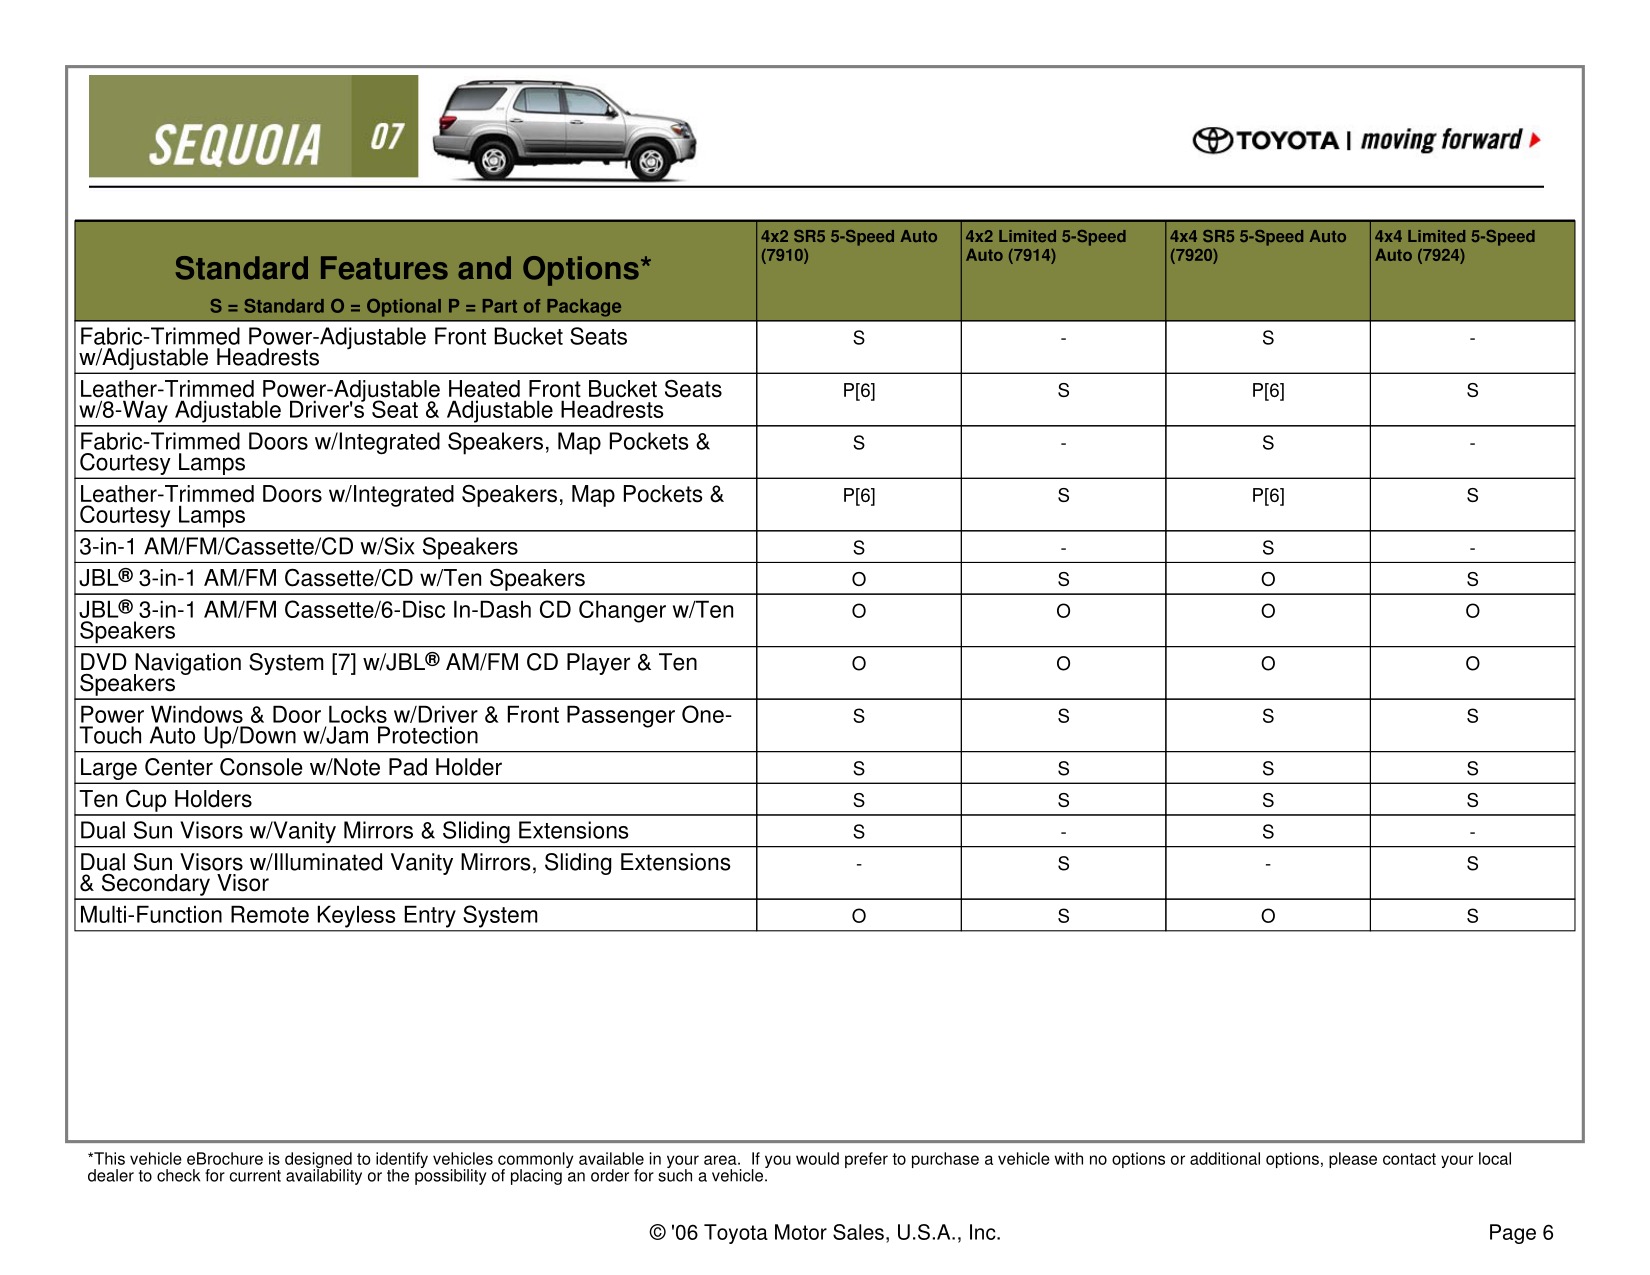 2007 Toyota Sequoia Brochure Page 12